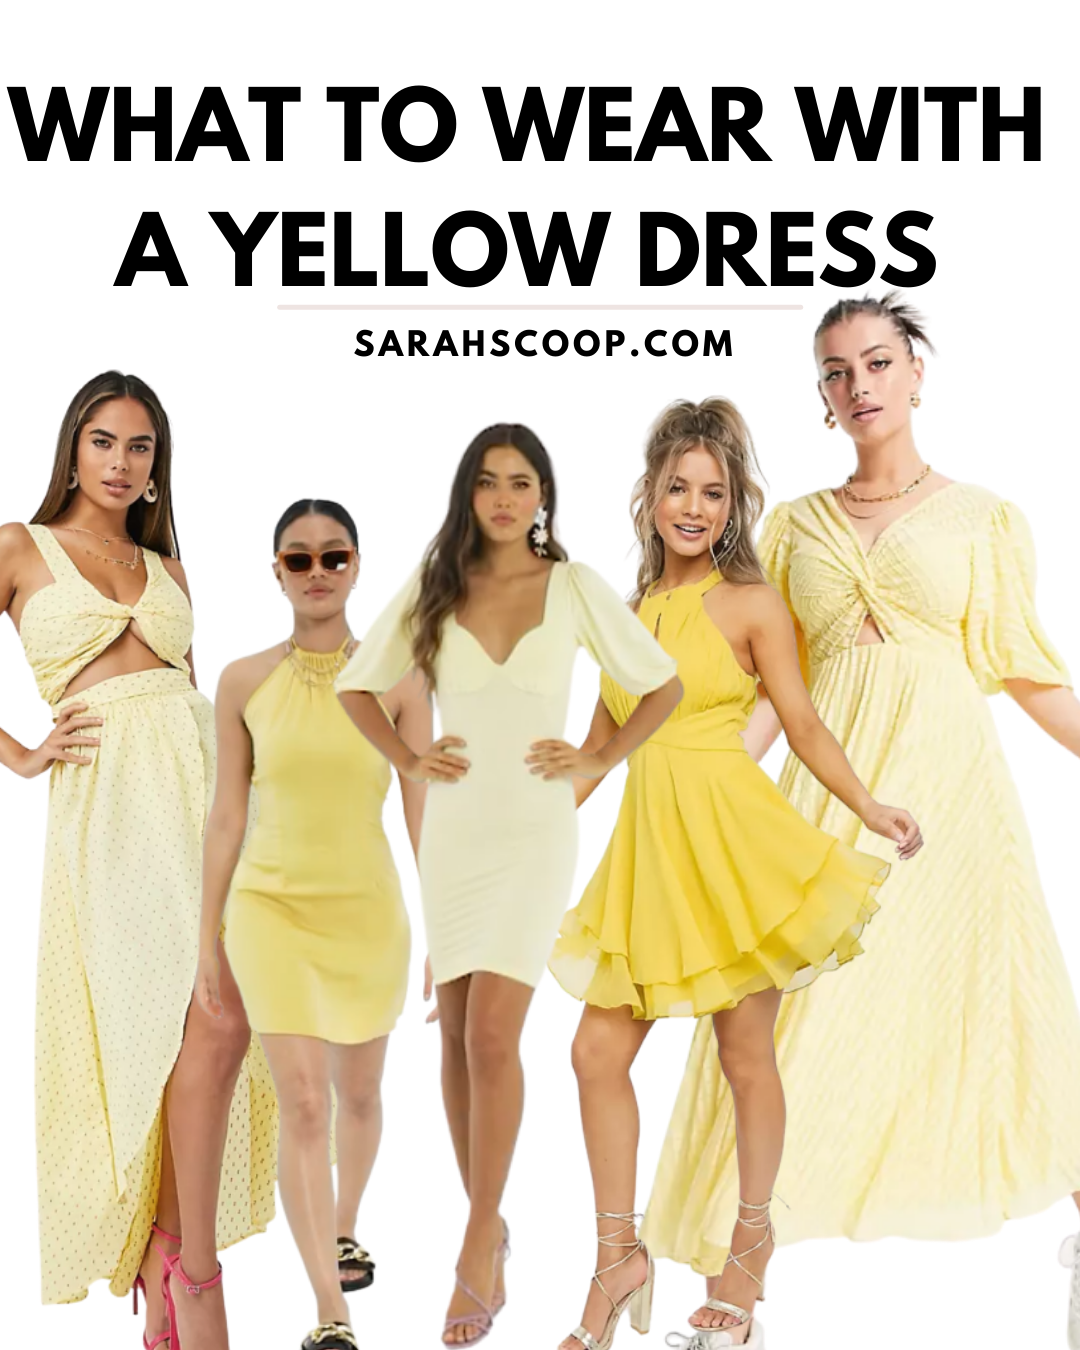 What to Wear With a Yellow Dress for Summer | Sarah Scoop